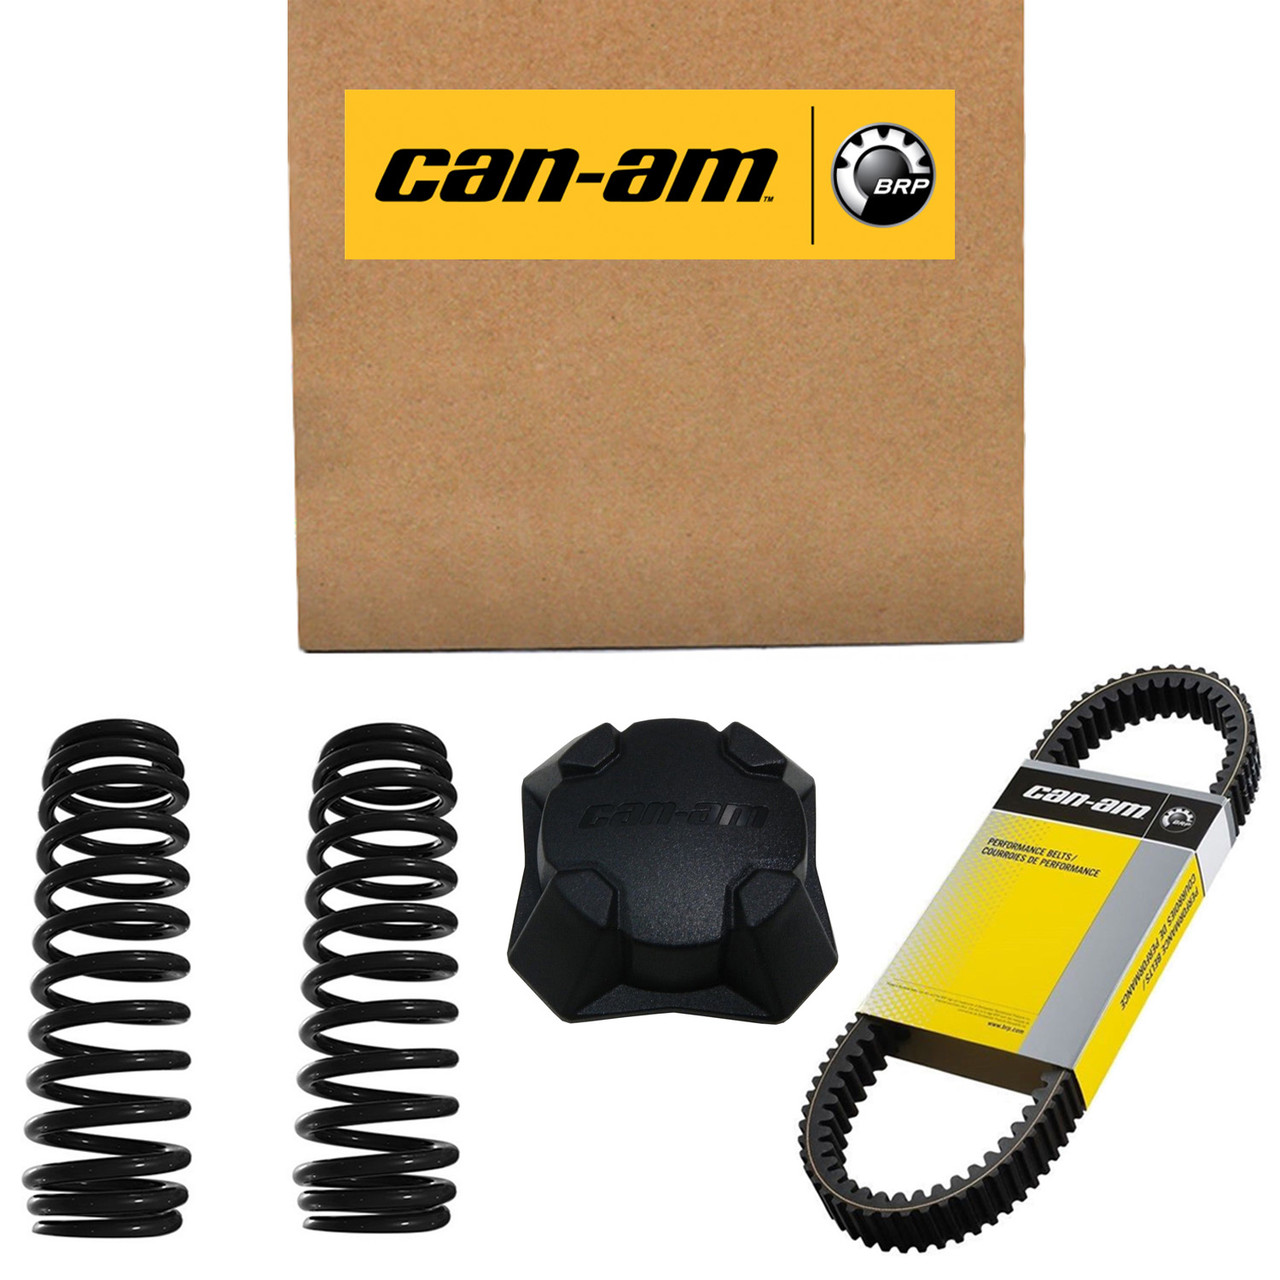 Can-Am New OEM Relflector, 708300810